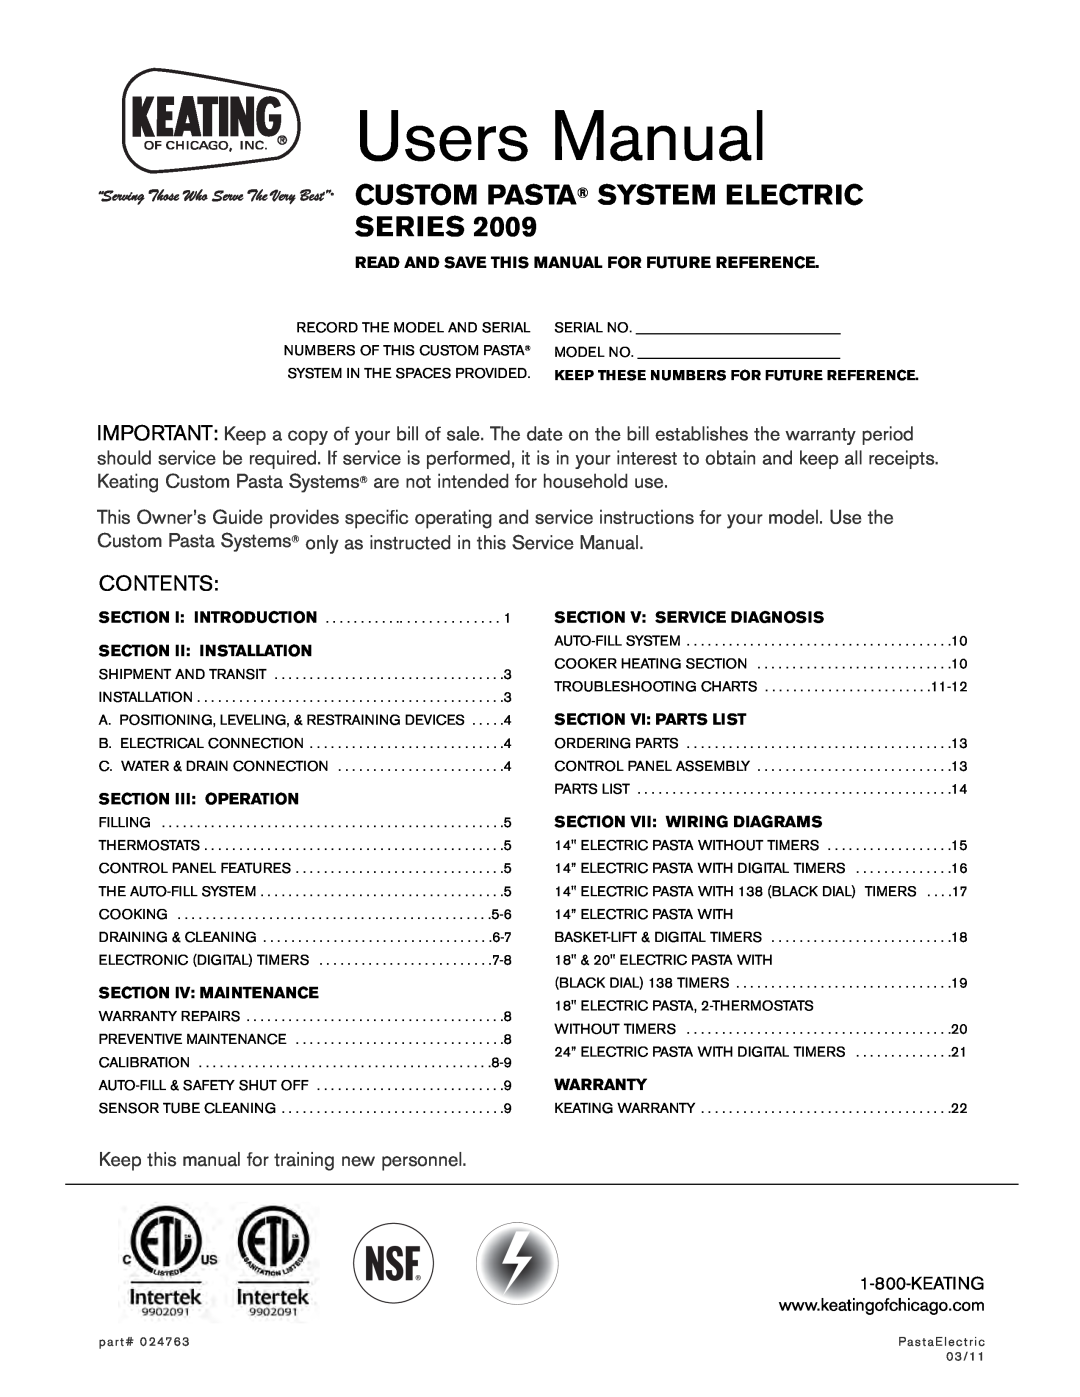 Keating Of Chicago 2009 manual Custom Pasta System Electric Series 